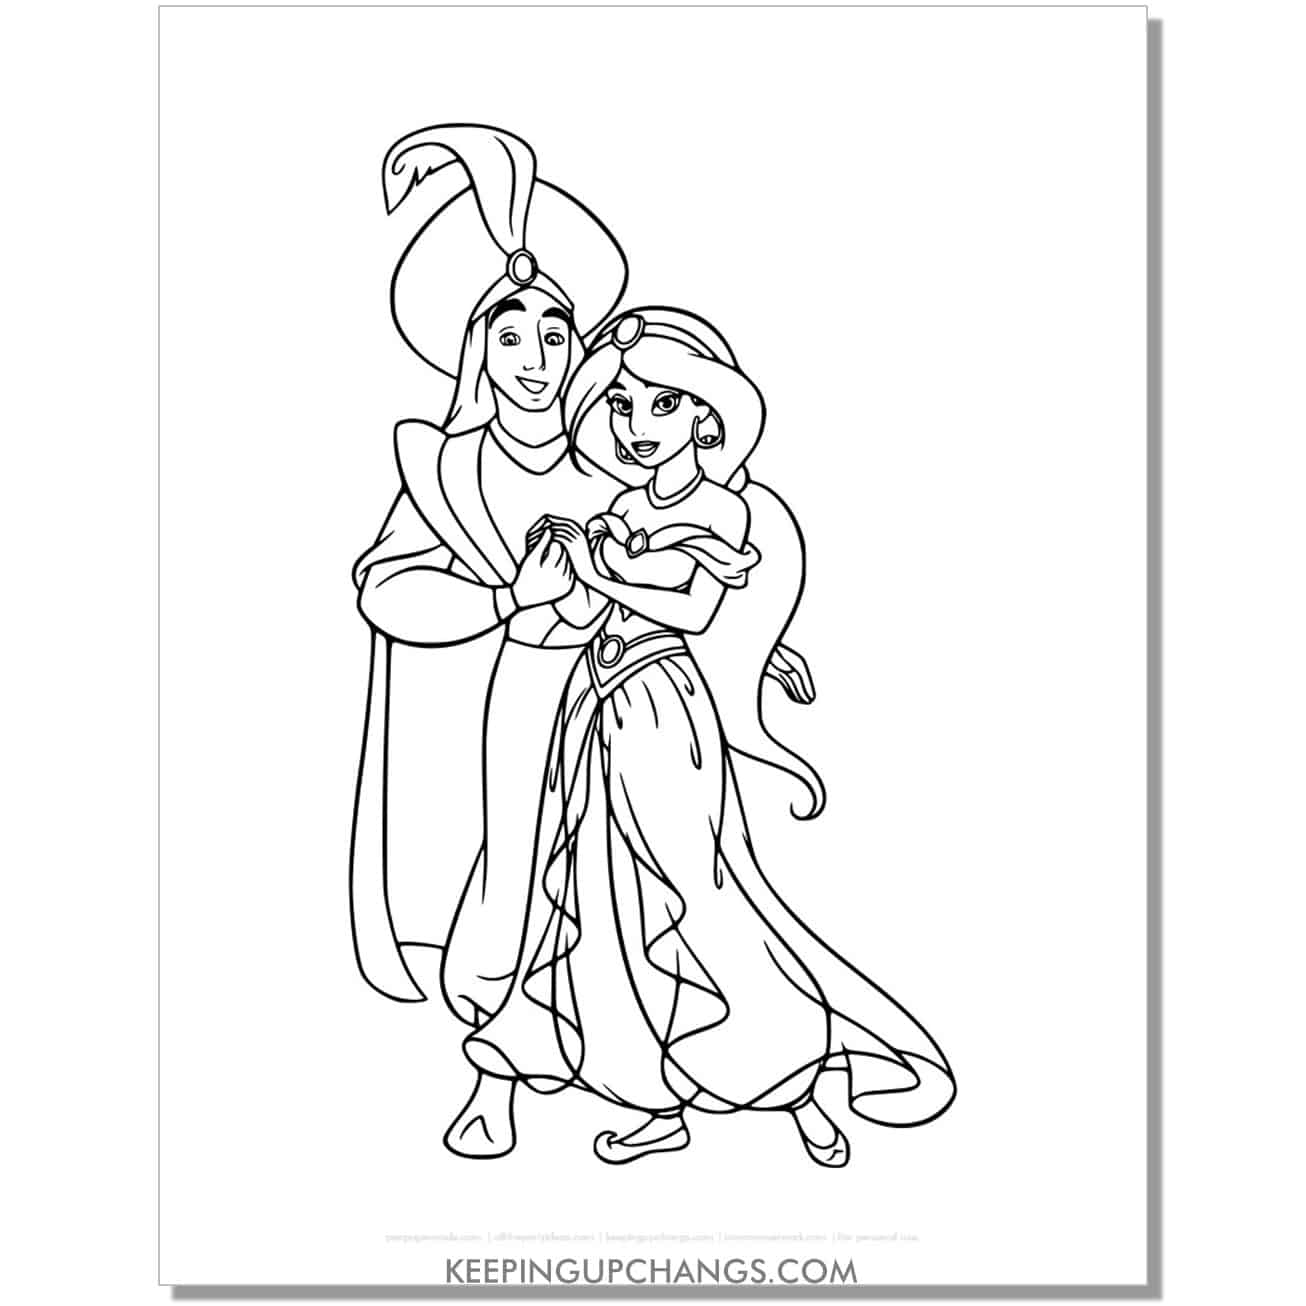 jasmine posing with prince ali coloring page, sheet.